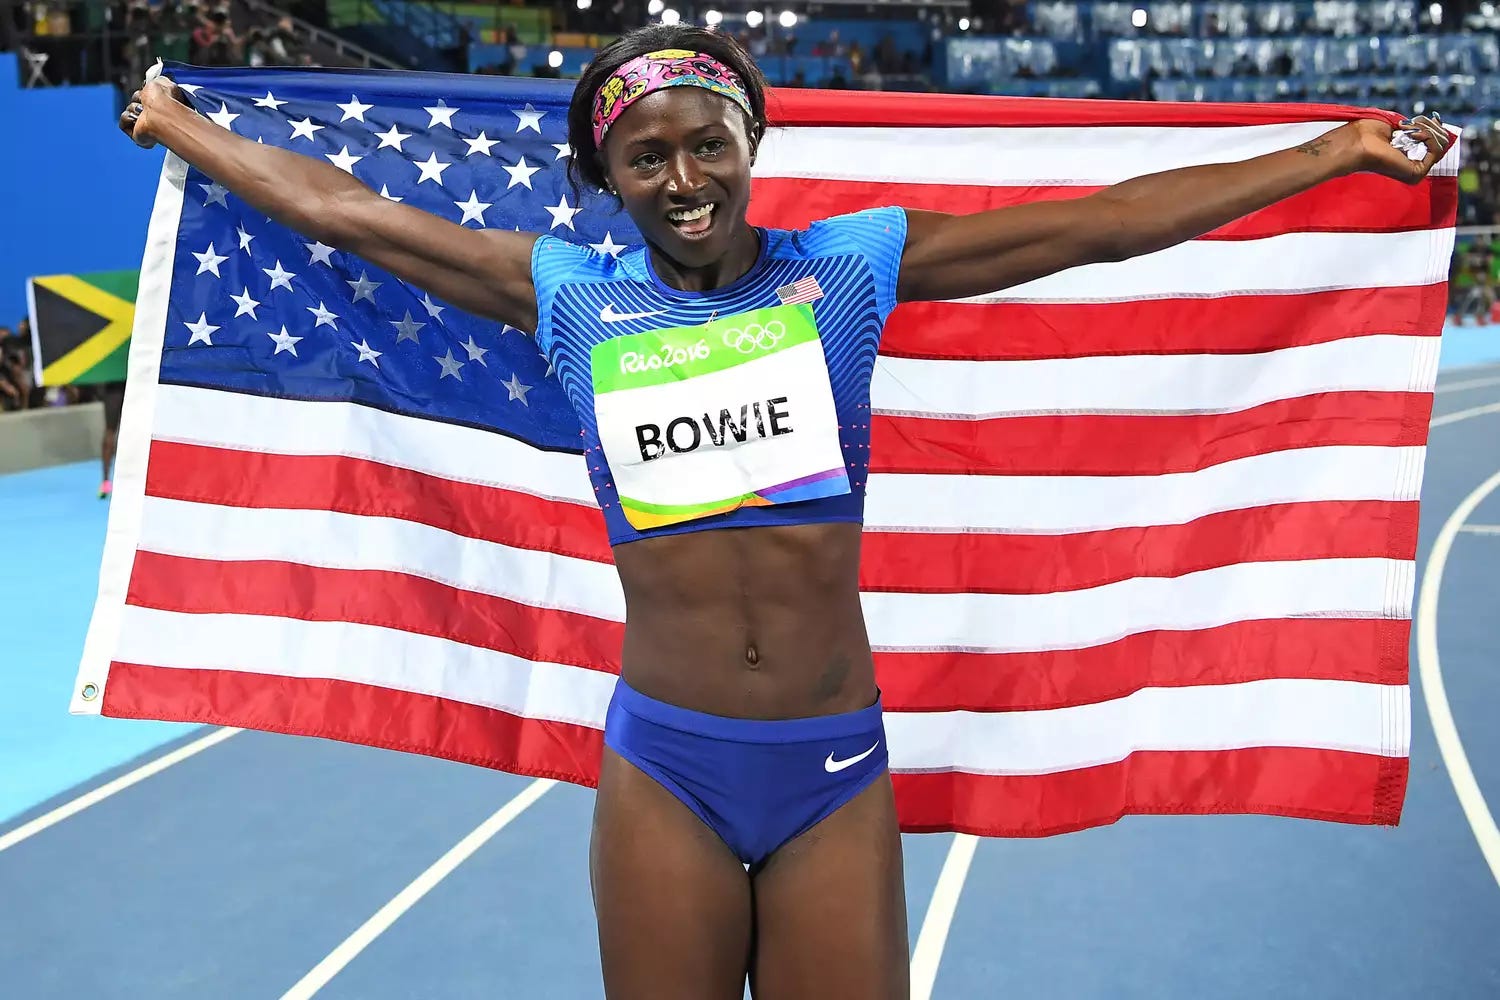 Silver medallist USA's Tori Bowie celebrates after the Women's 100m Final during the athletics event at the Rio 2016 Olympic Games at the Olympic Stadium in Rio de Janeiro on August 13, 2016.